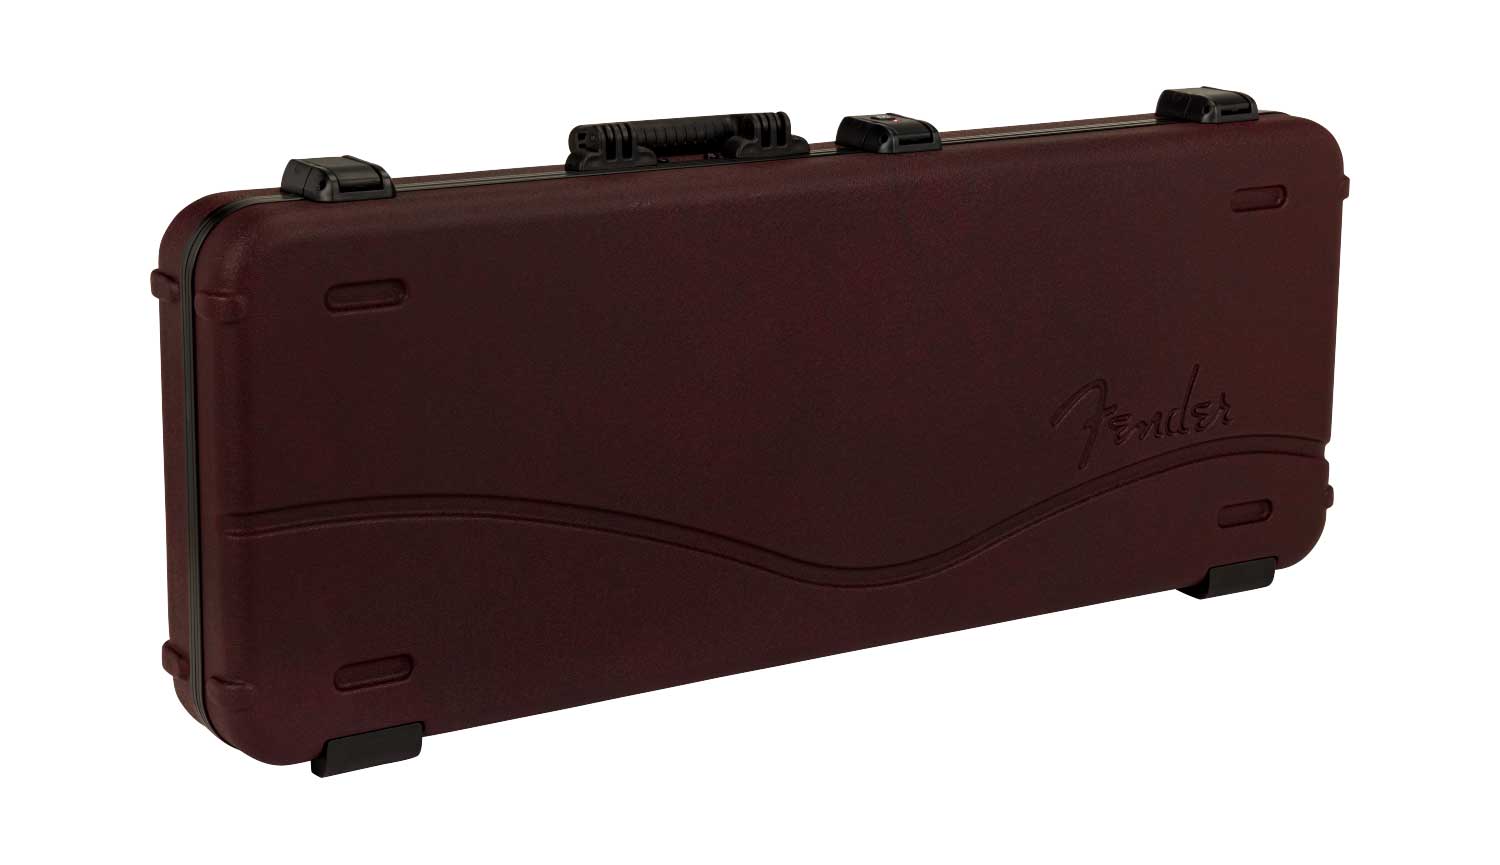 Fender Limited Edition Deluxe Moulded Stratocaster Telecaster Case